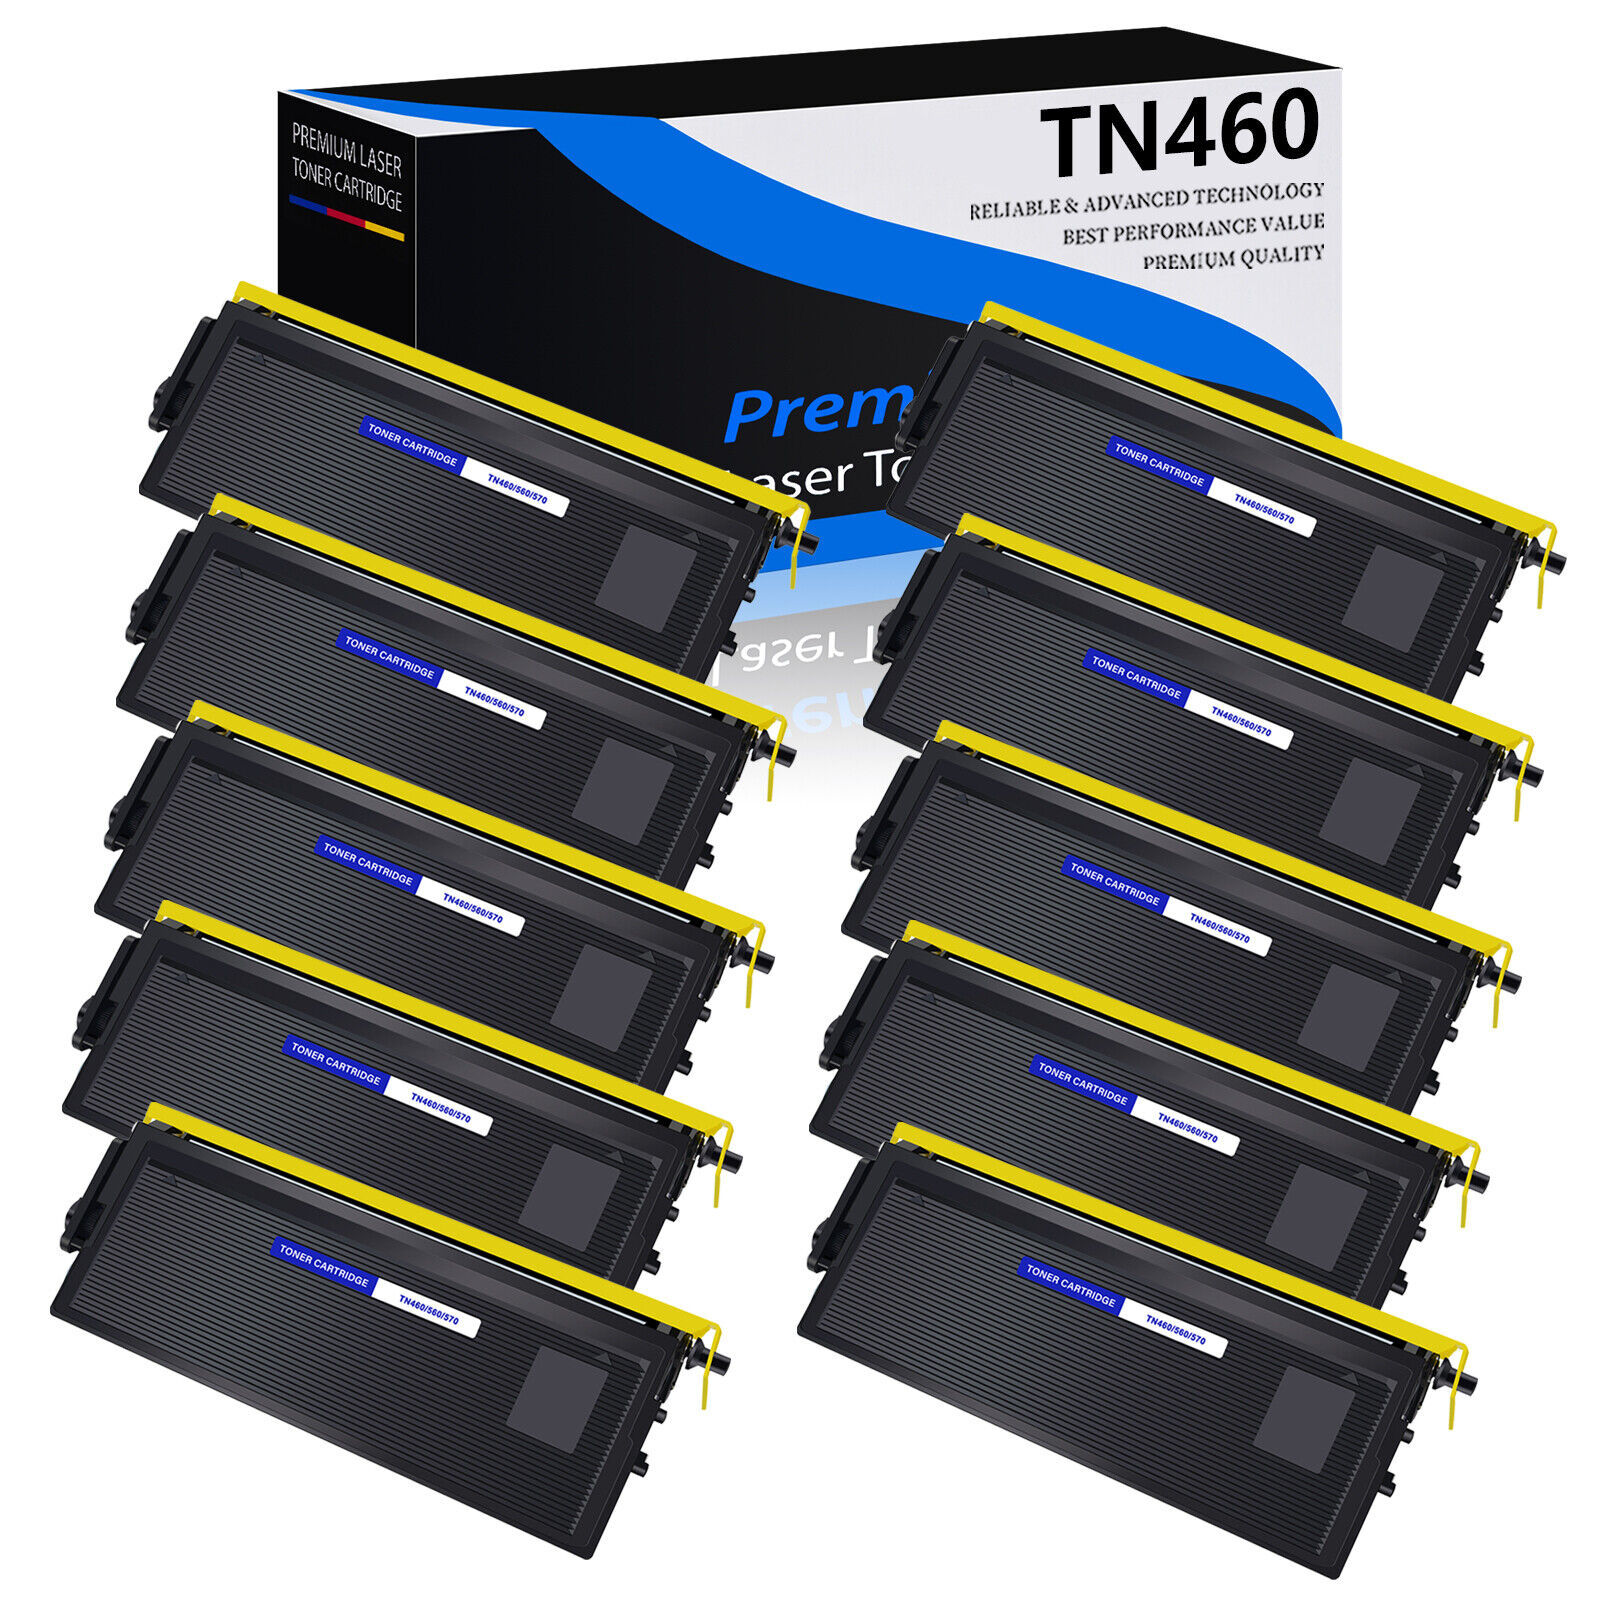 10PK TN460 Toner Cartridge For Brother TN-460 MFC-9700 MFC-9750 MFC-9800 9850